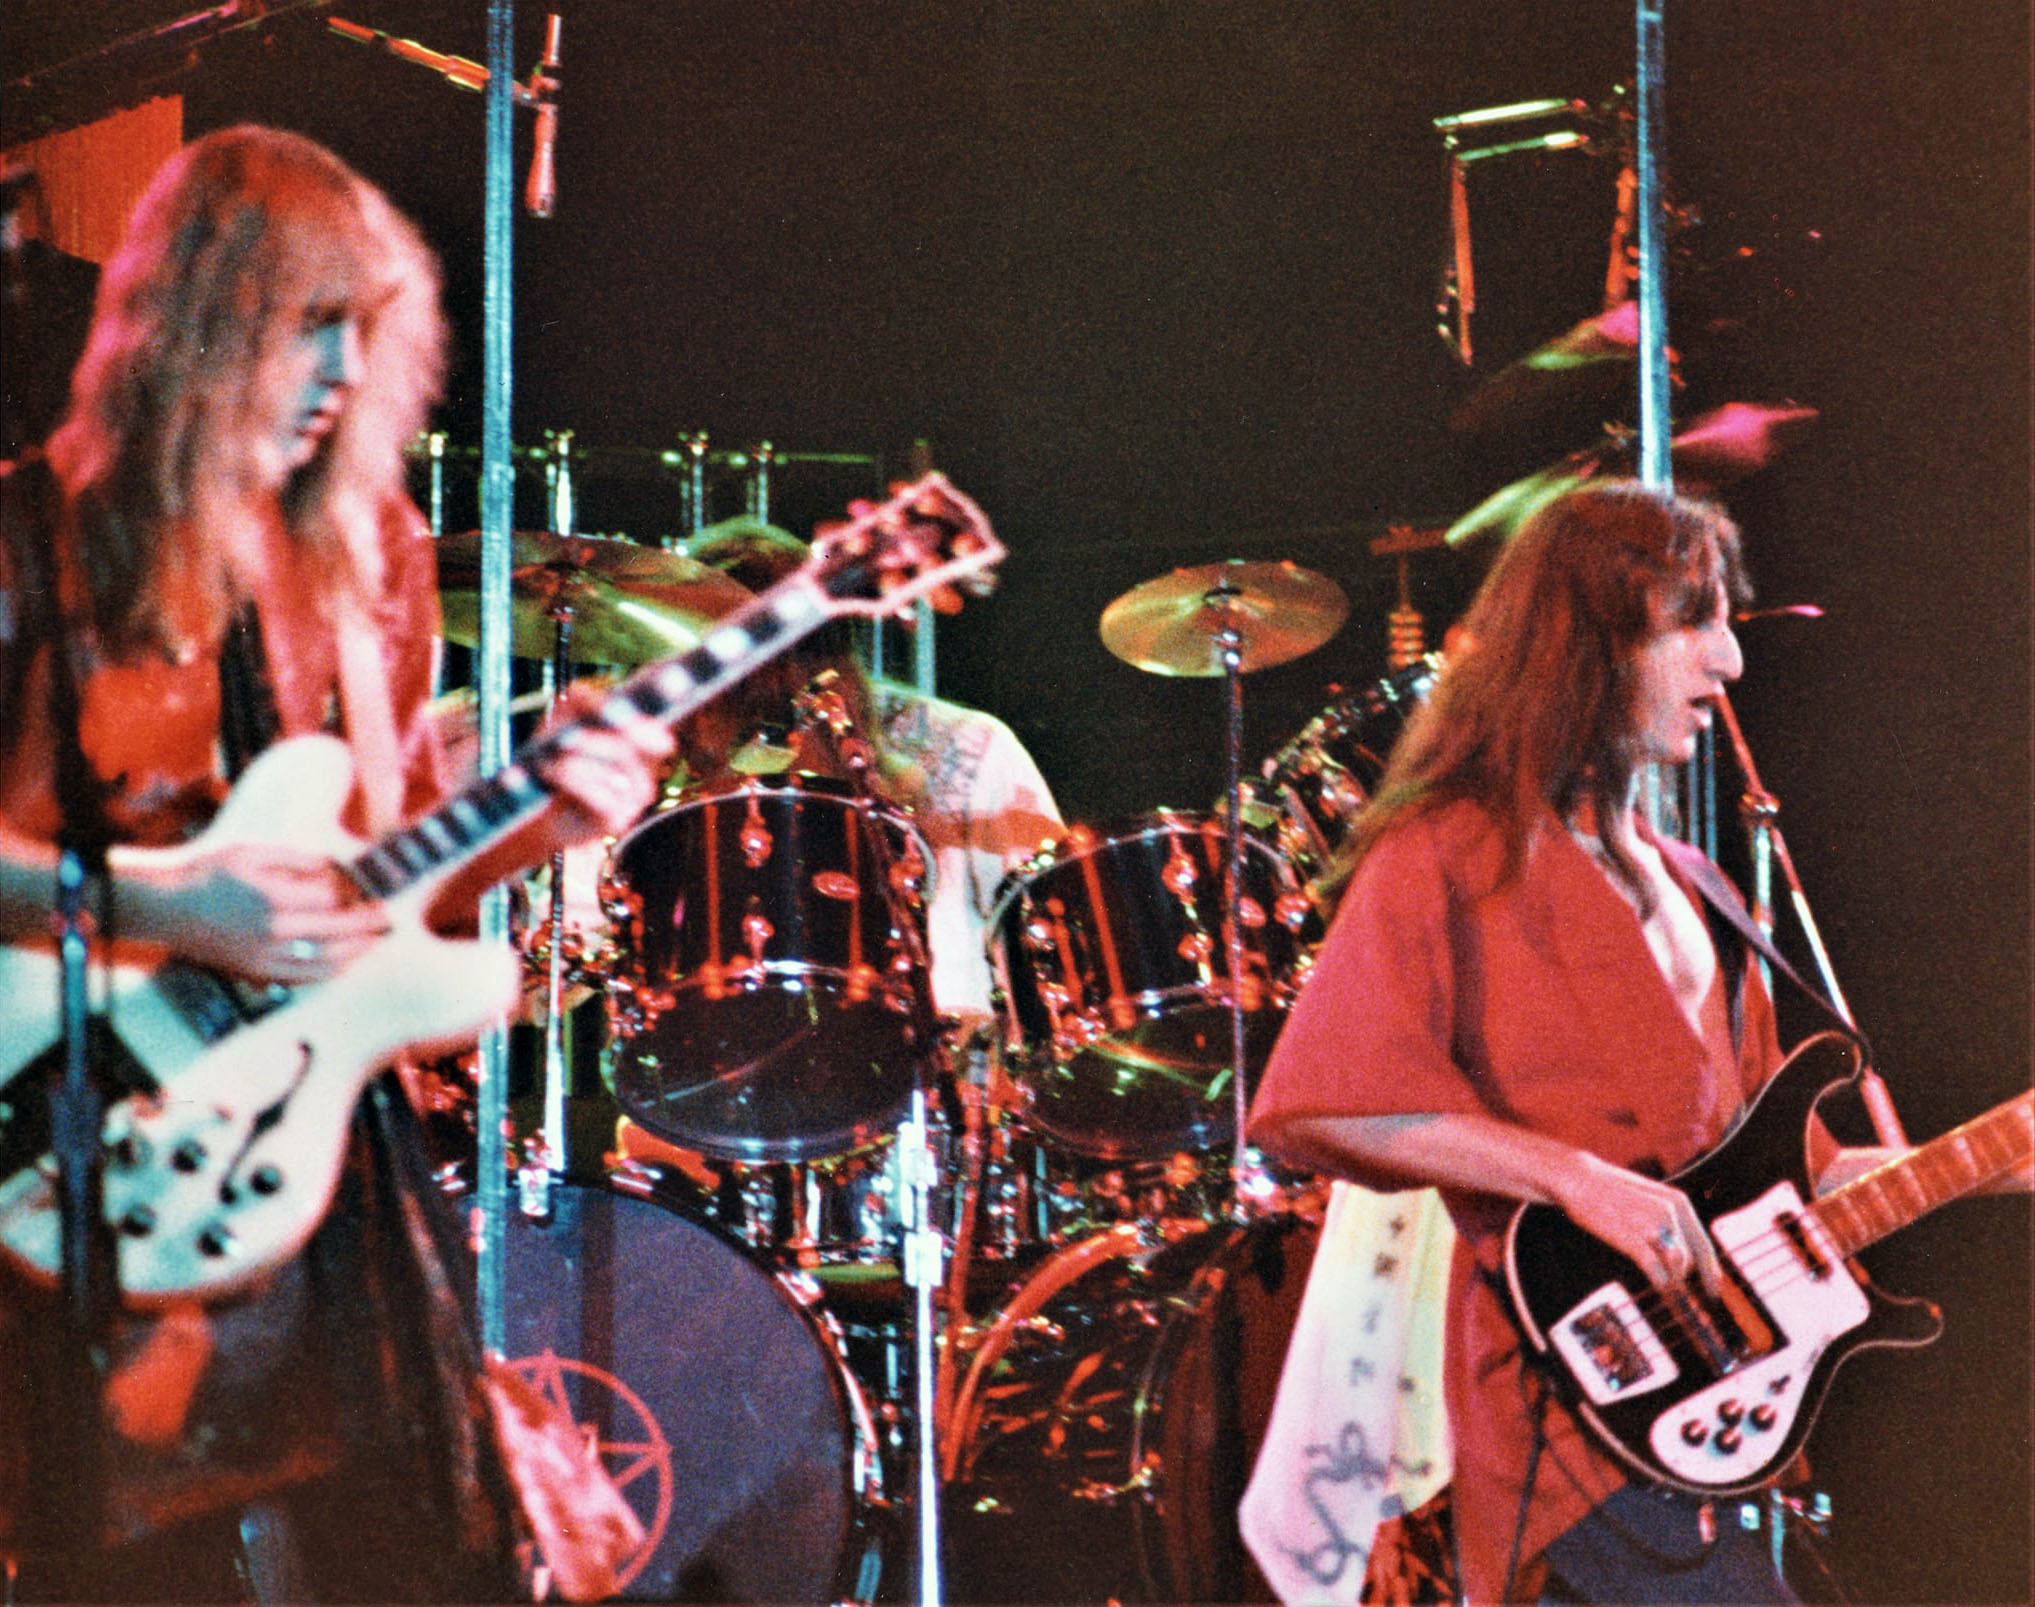 Rush 'A Farewell to Kings' Tour Pictures - Wendler Arena at Saginaw Civic Center - Saginaw, Michigan - January 21st, 1978